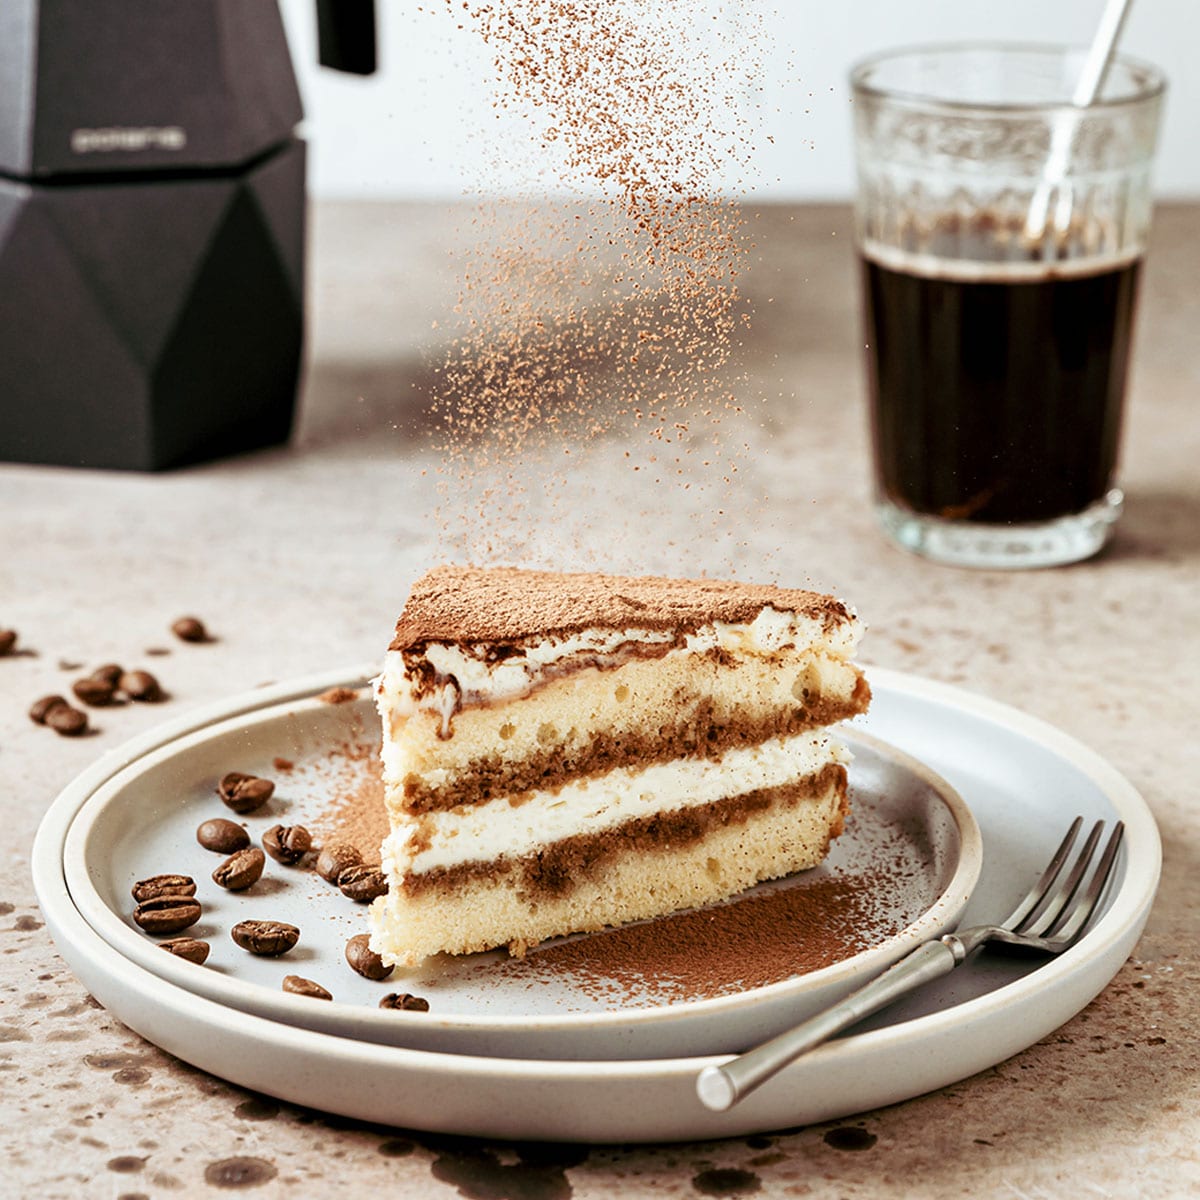 The main ingredient in Tiramisu is ladyfingers, which are biscuit-like cookies made with egg whites, sugar, and flour. Tiramisu consists of ladyfingers soaked in coffee, indicating that the dessert probably contains some caffeine.